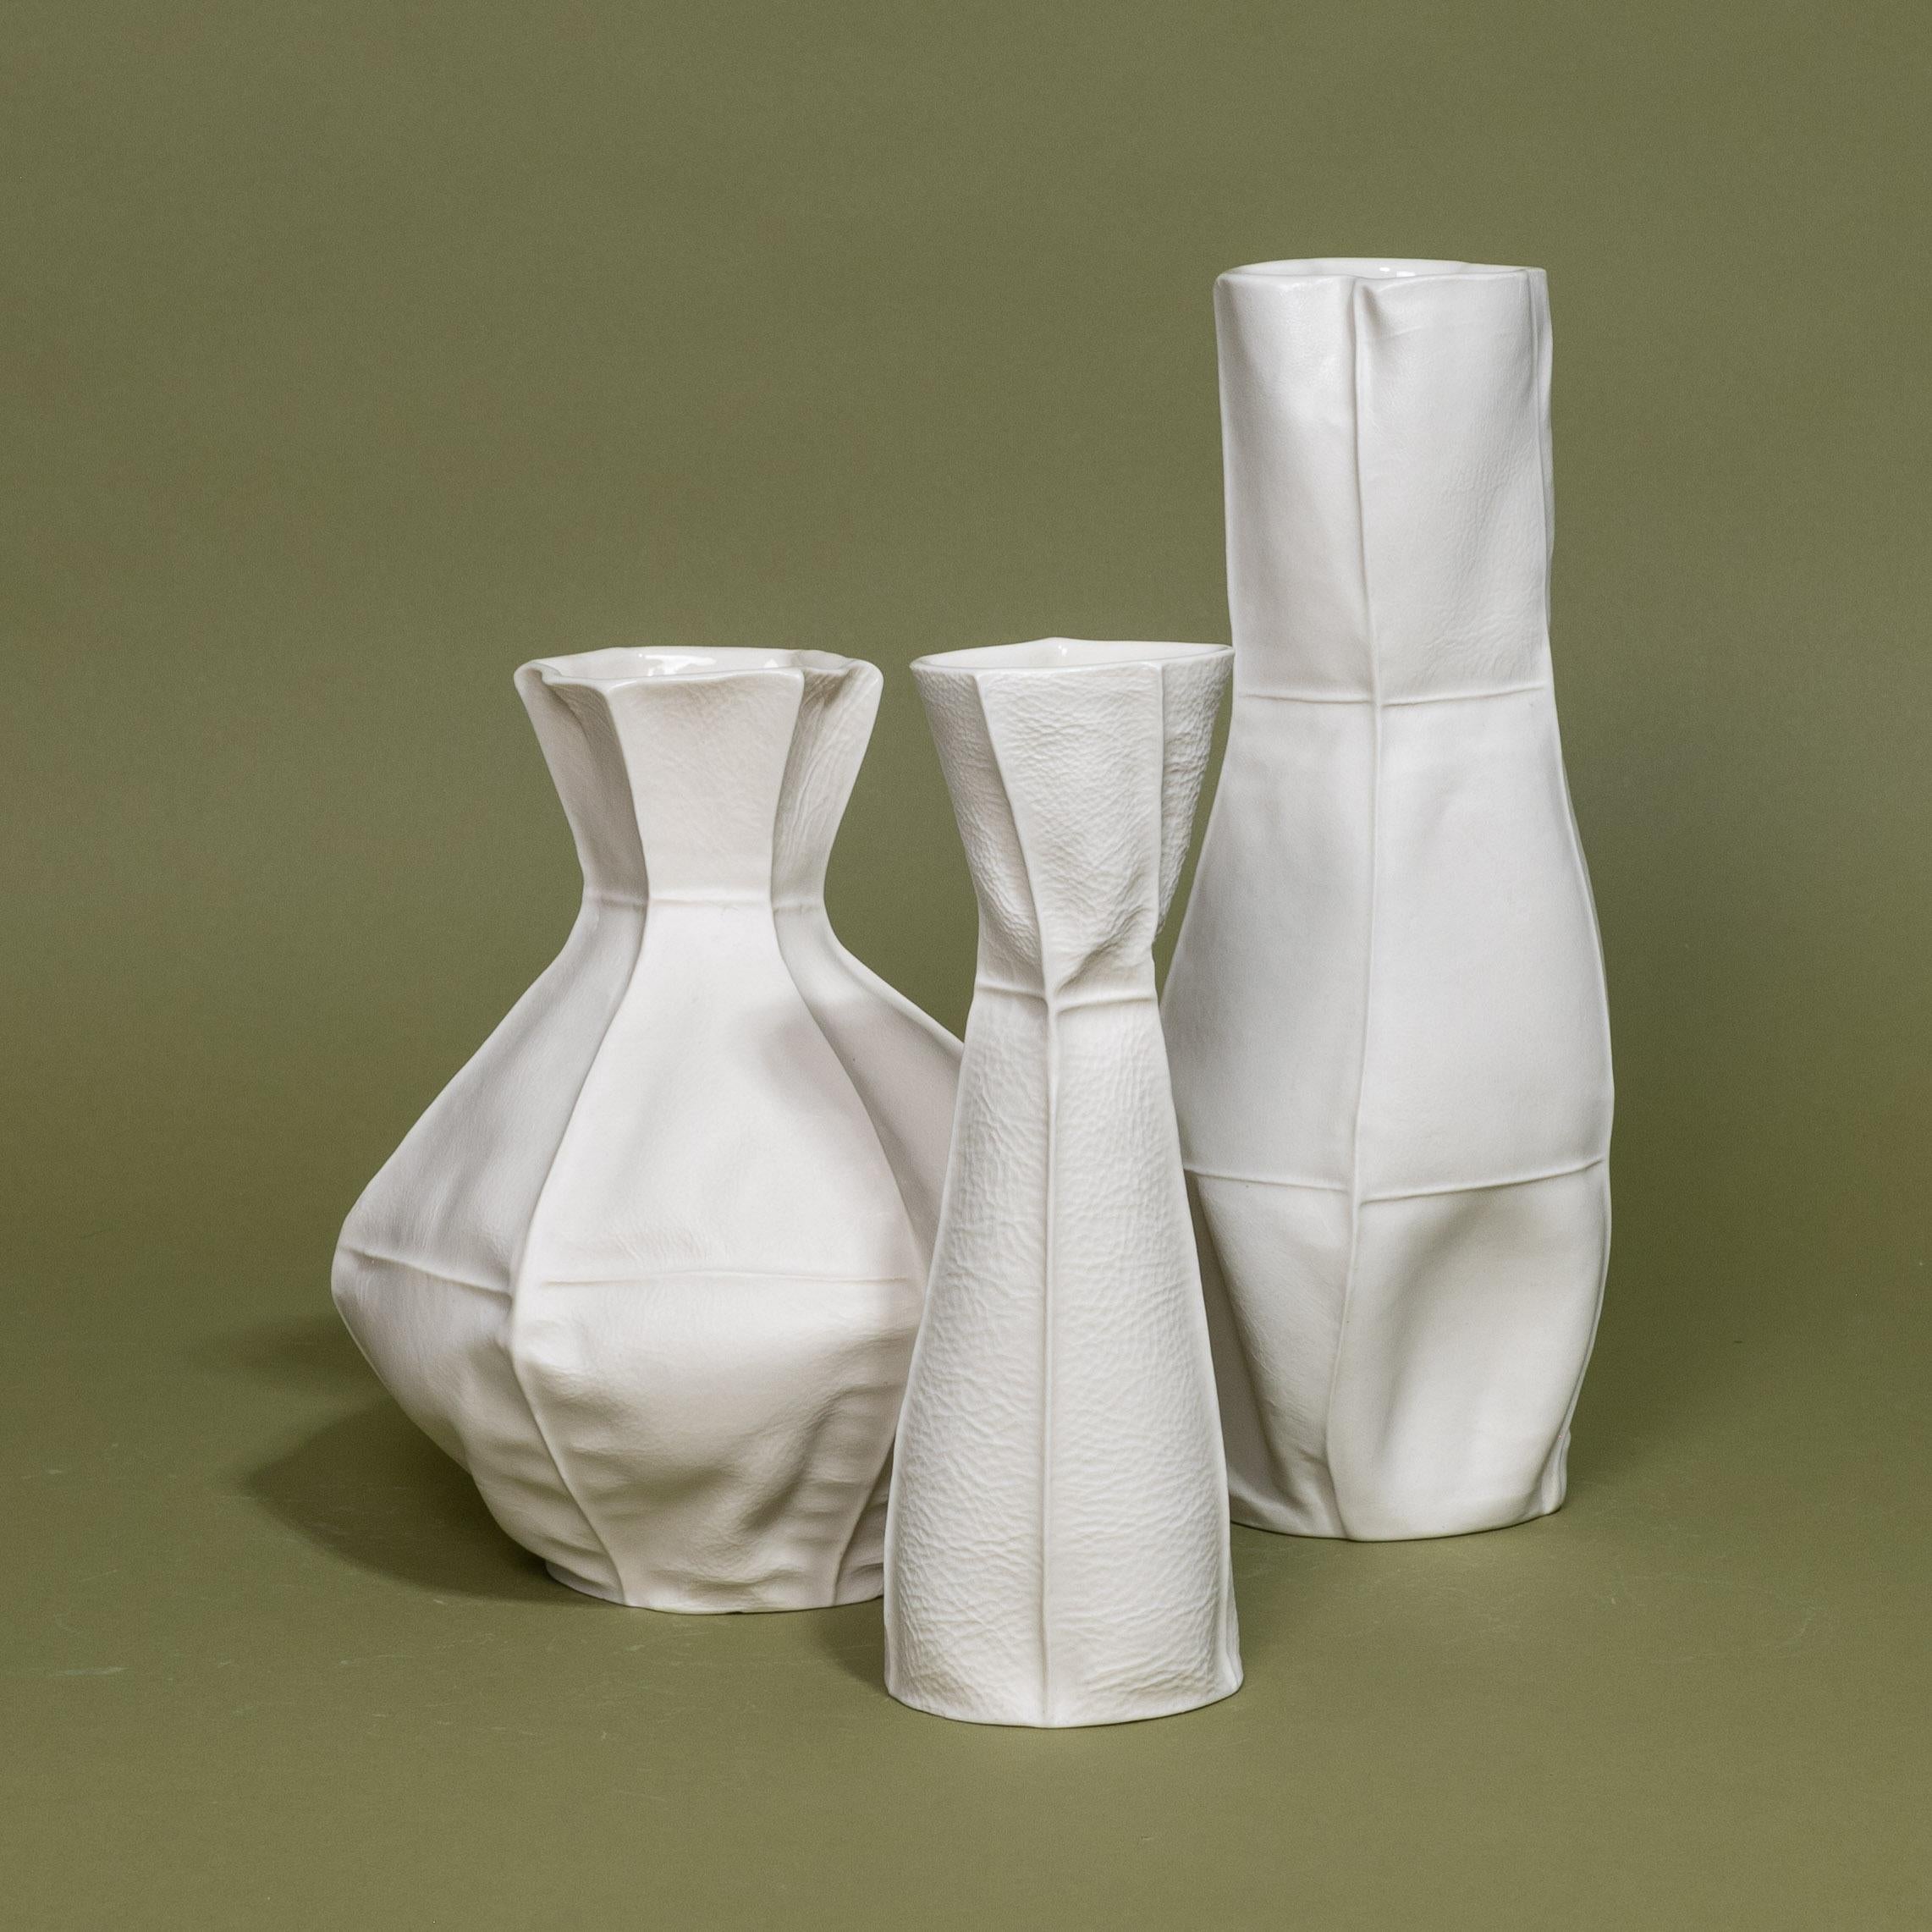 Set of 3 White Ceramic Kawa Vases, Luft Tanaka, organic, porcelain In New Condition For Sale In Brooklyn, NY